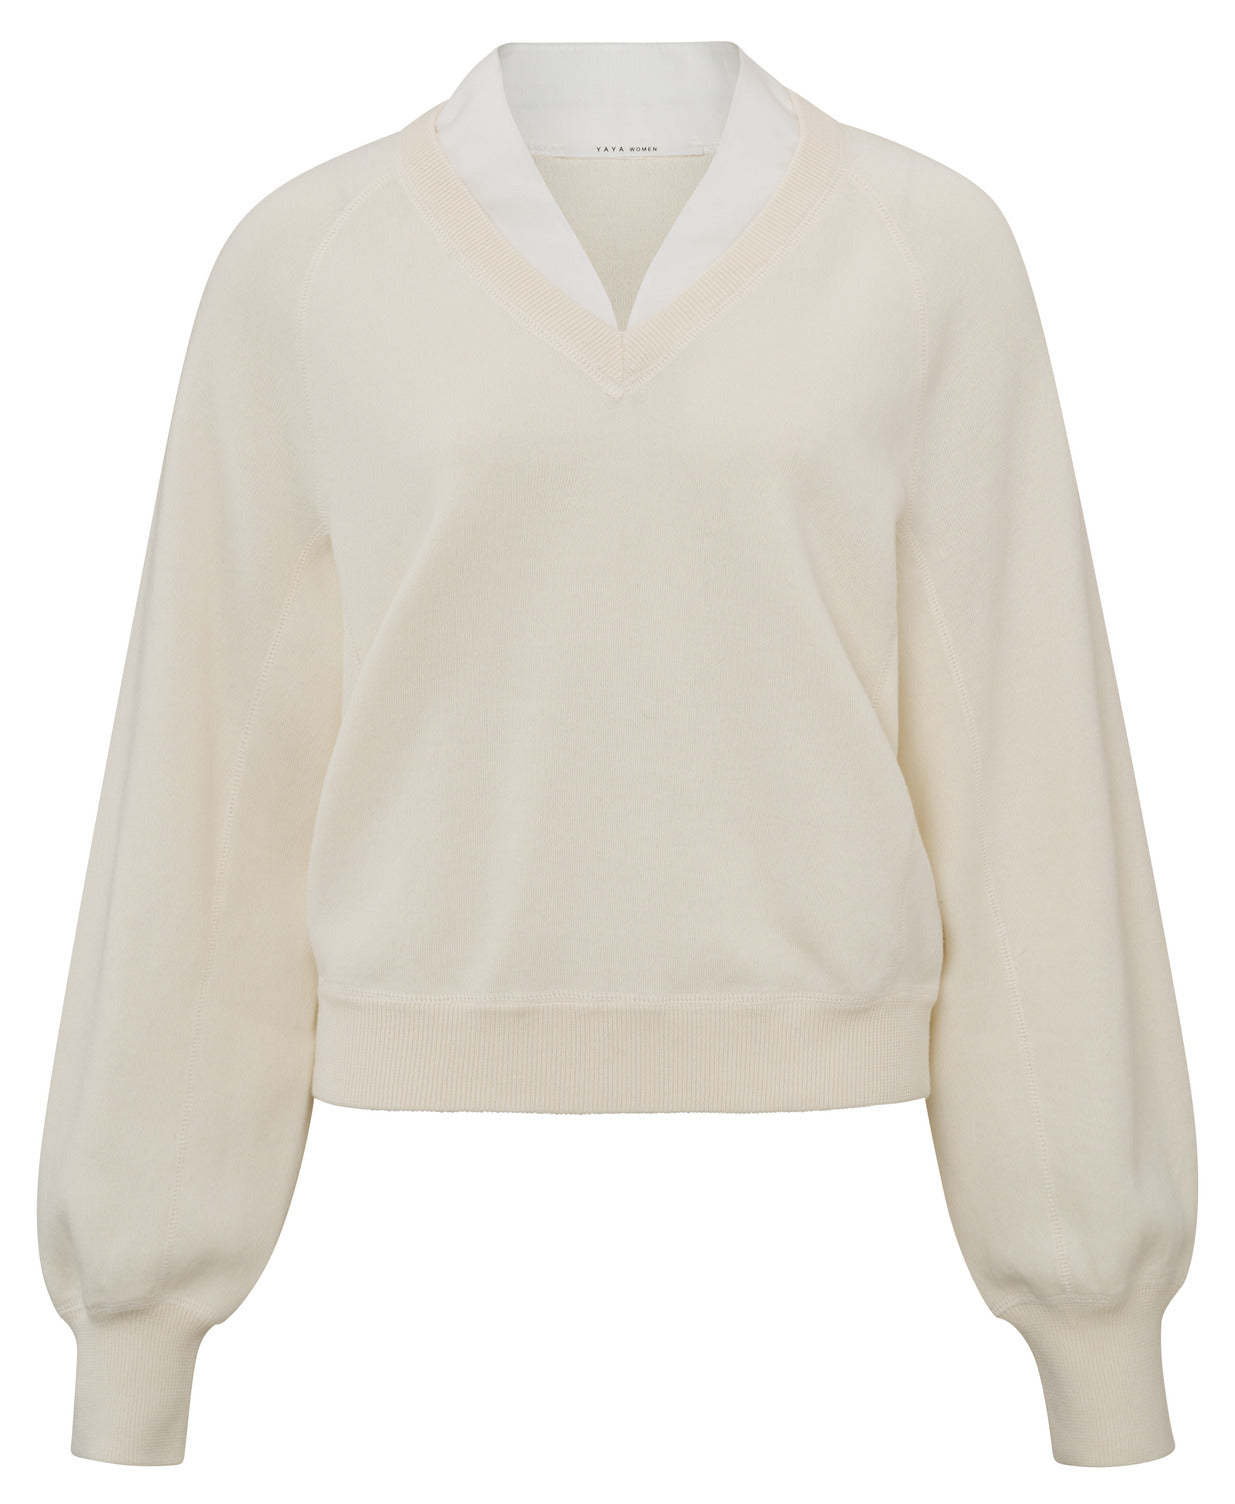 V-neck with woven detail sweater YAYA